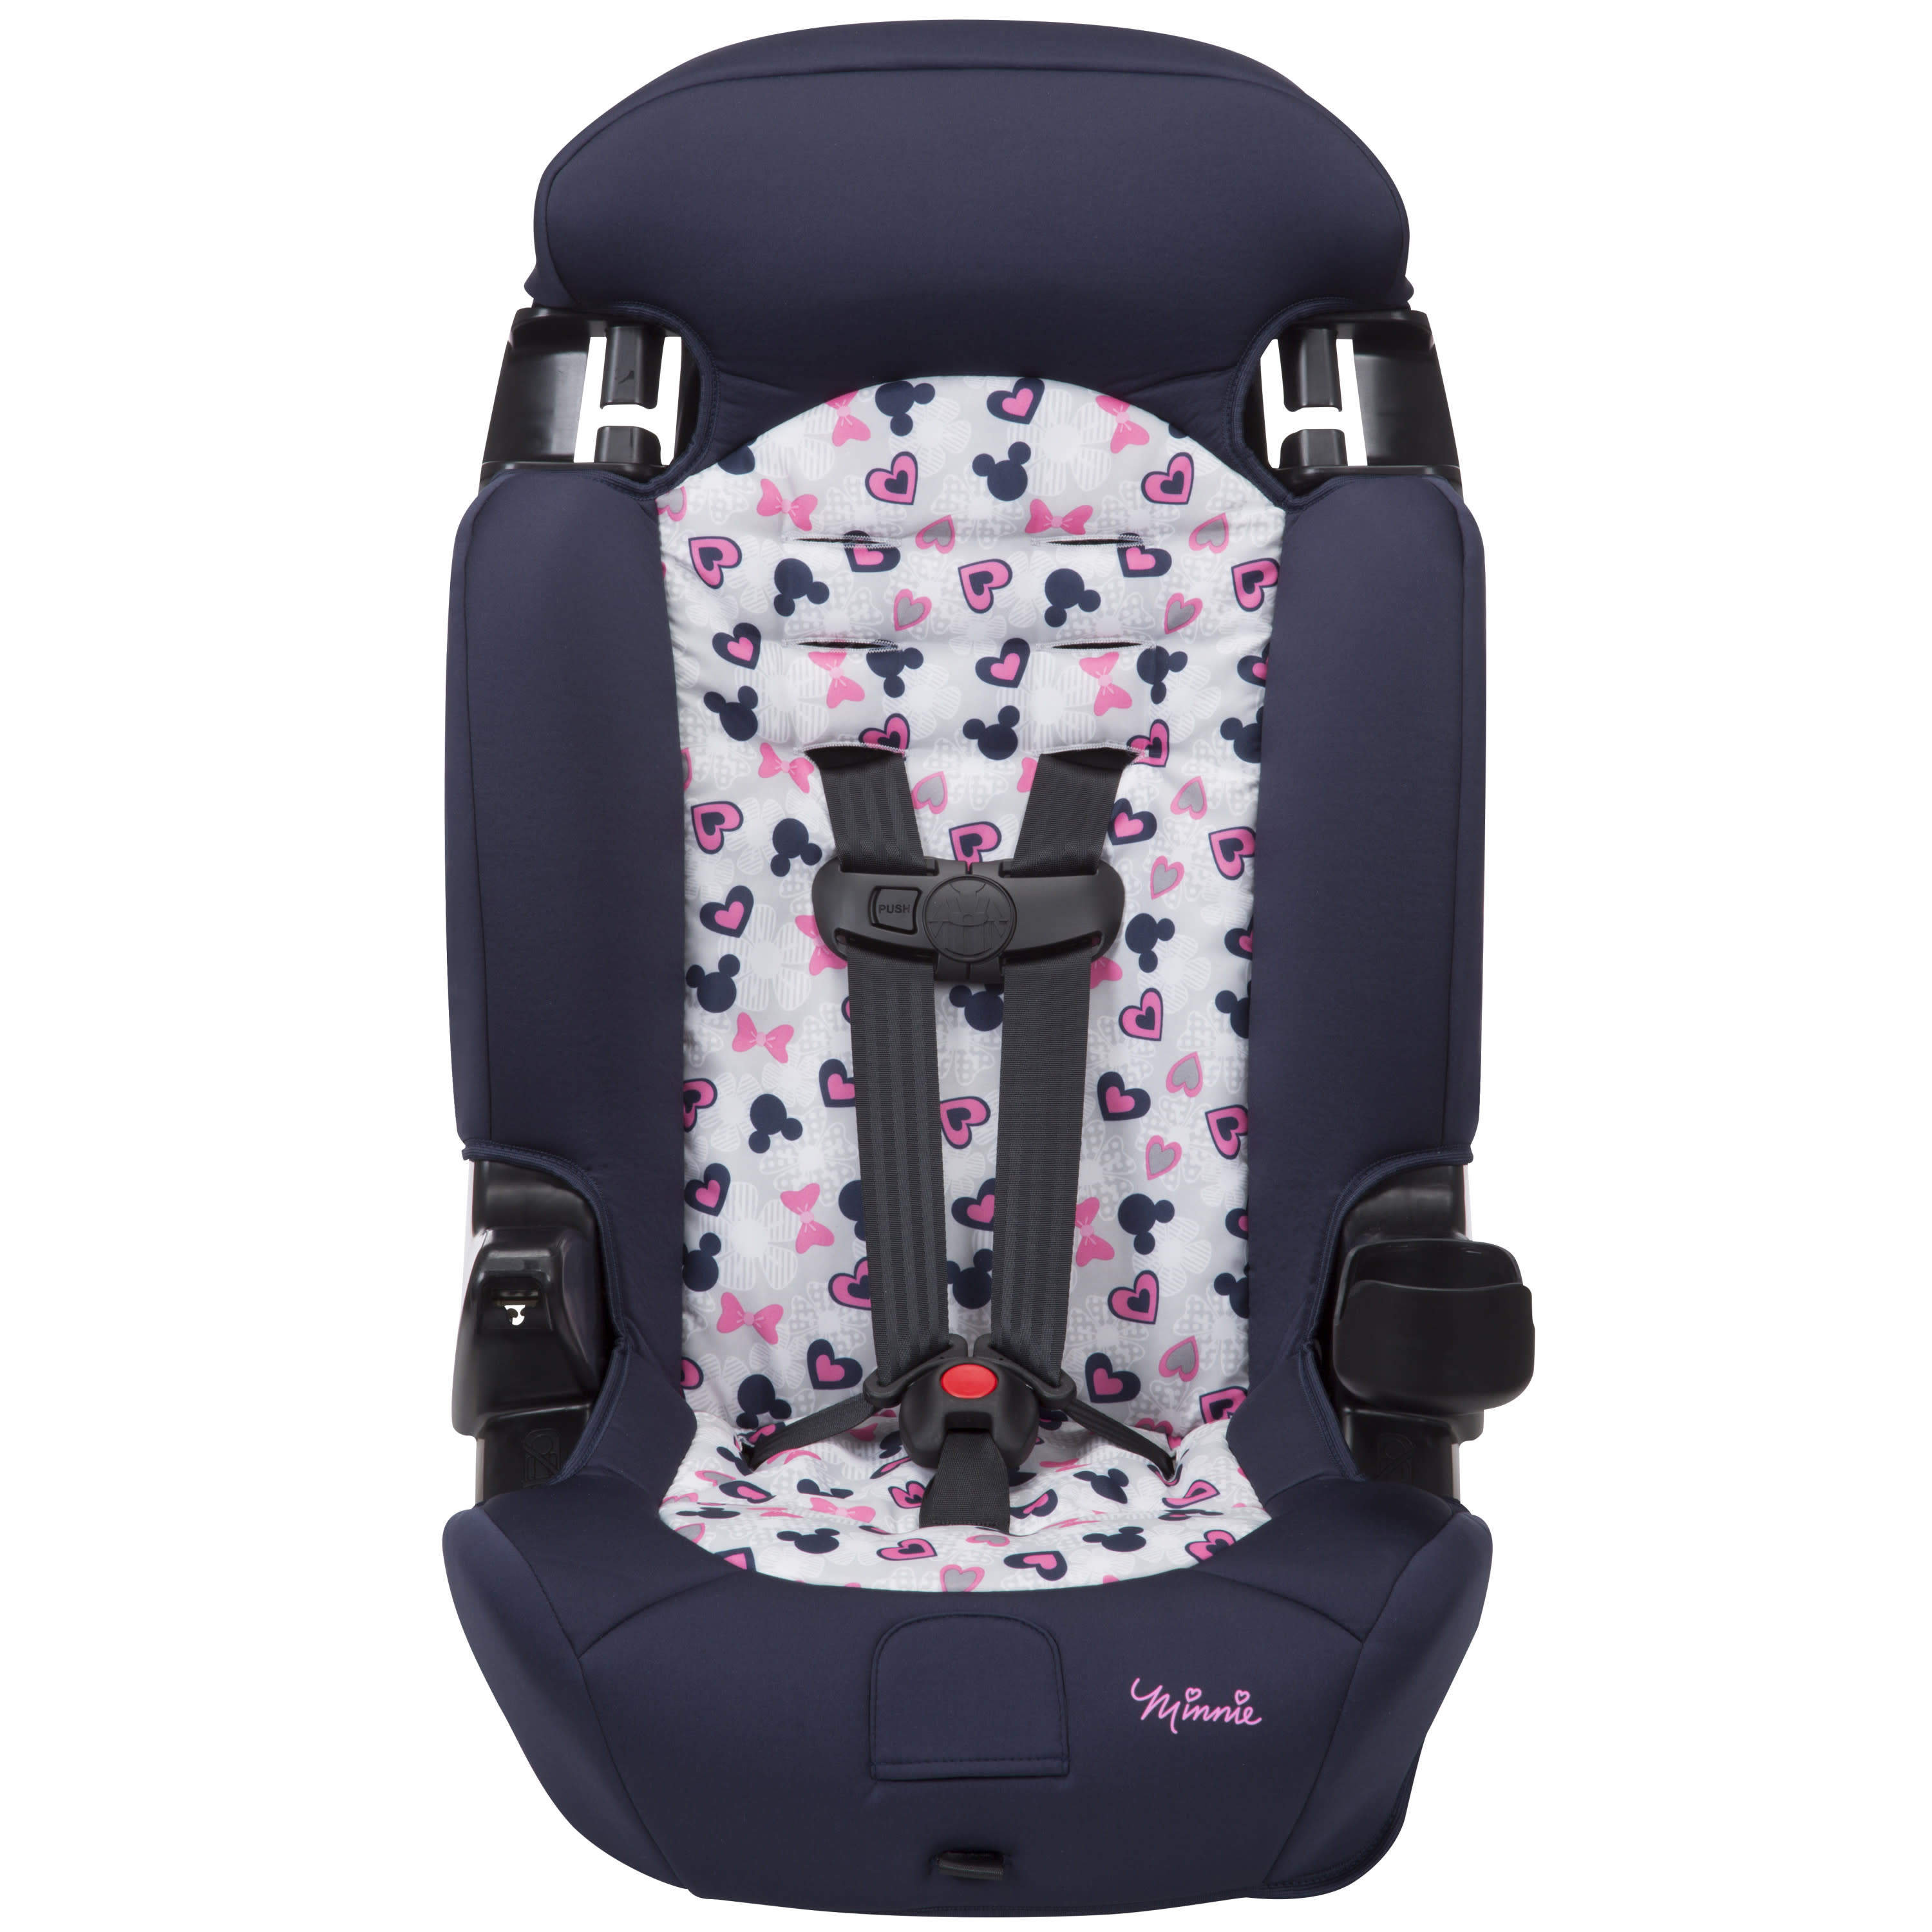 Disney Baby Finale 2-in-1 Booster Car Seat, Minnie's Favorite Things - image 4 of 14